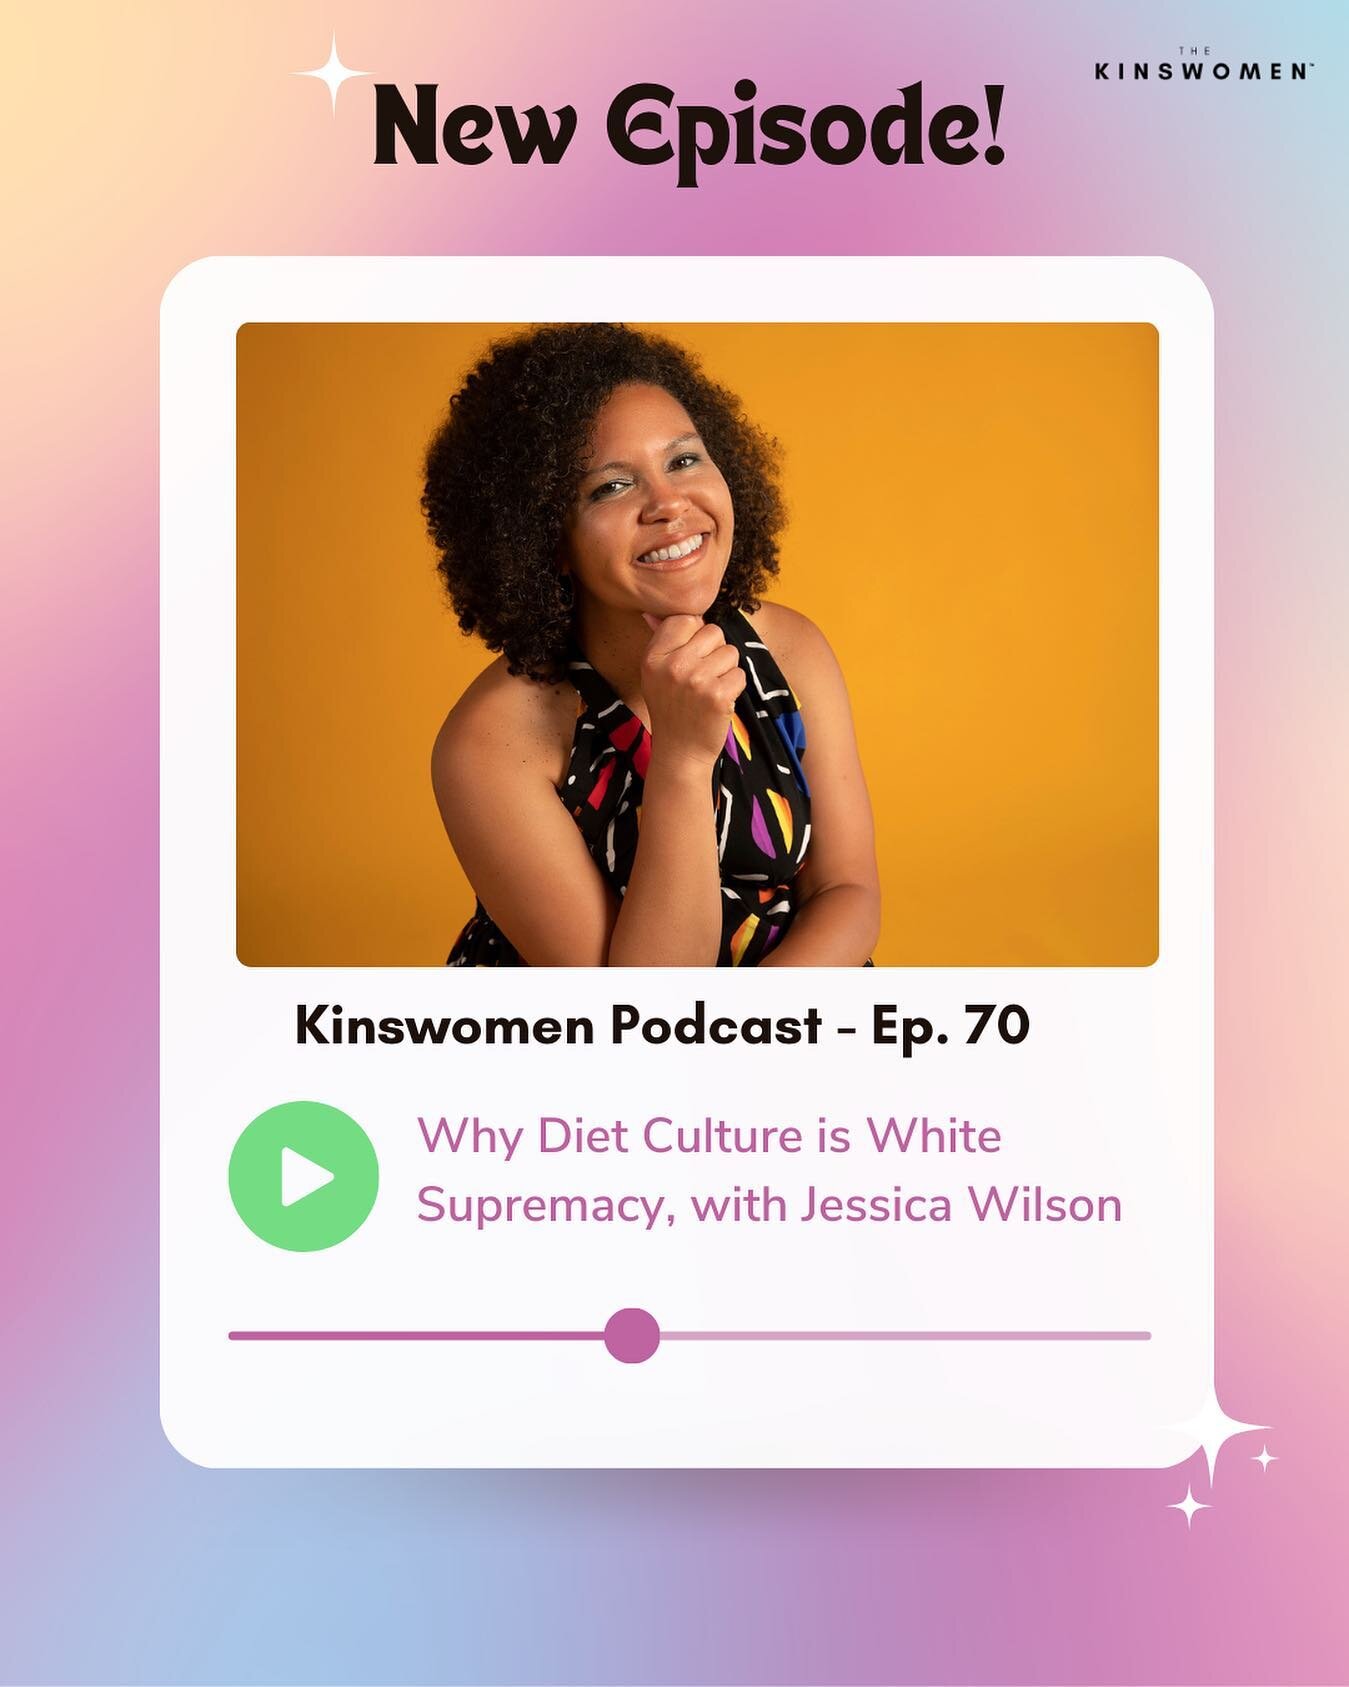 We have an amazing new episode out with @jessicawilson.msrd, on how diet and wellness culture is largely based in white supremacy, and how traditional health and nutrition ideology fails BIPOC, fat, and queer communities. 

This is *such* an importan